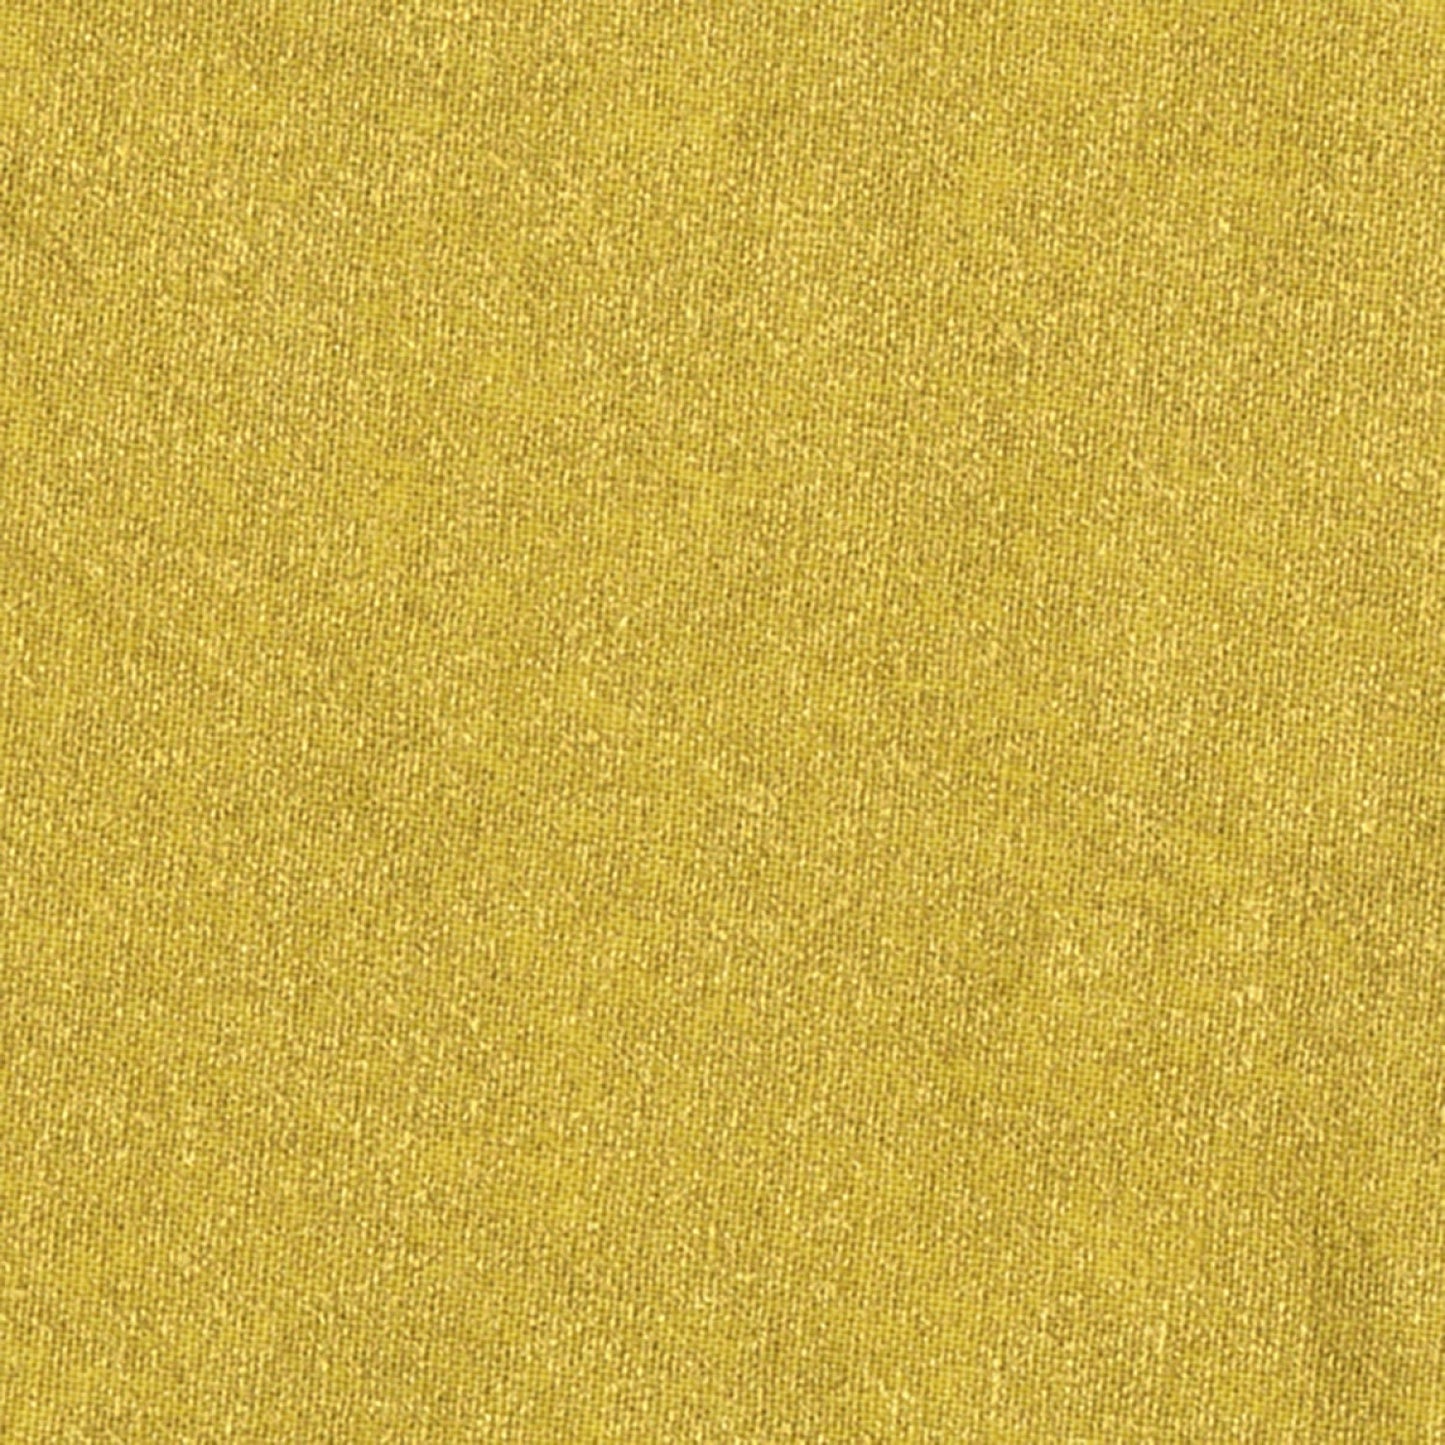 Gold Quilting Cotton - Metallic Gold 38934M-1 by Whistler Studios for Windham Fabrics